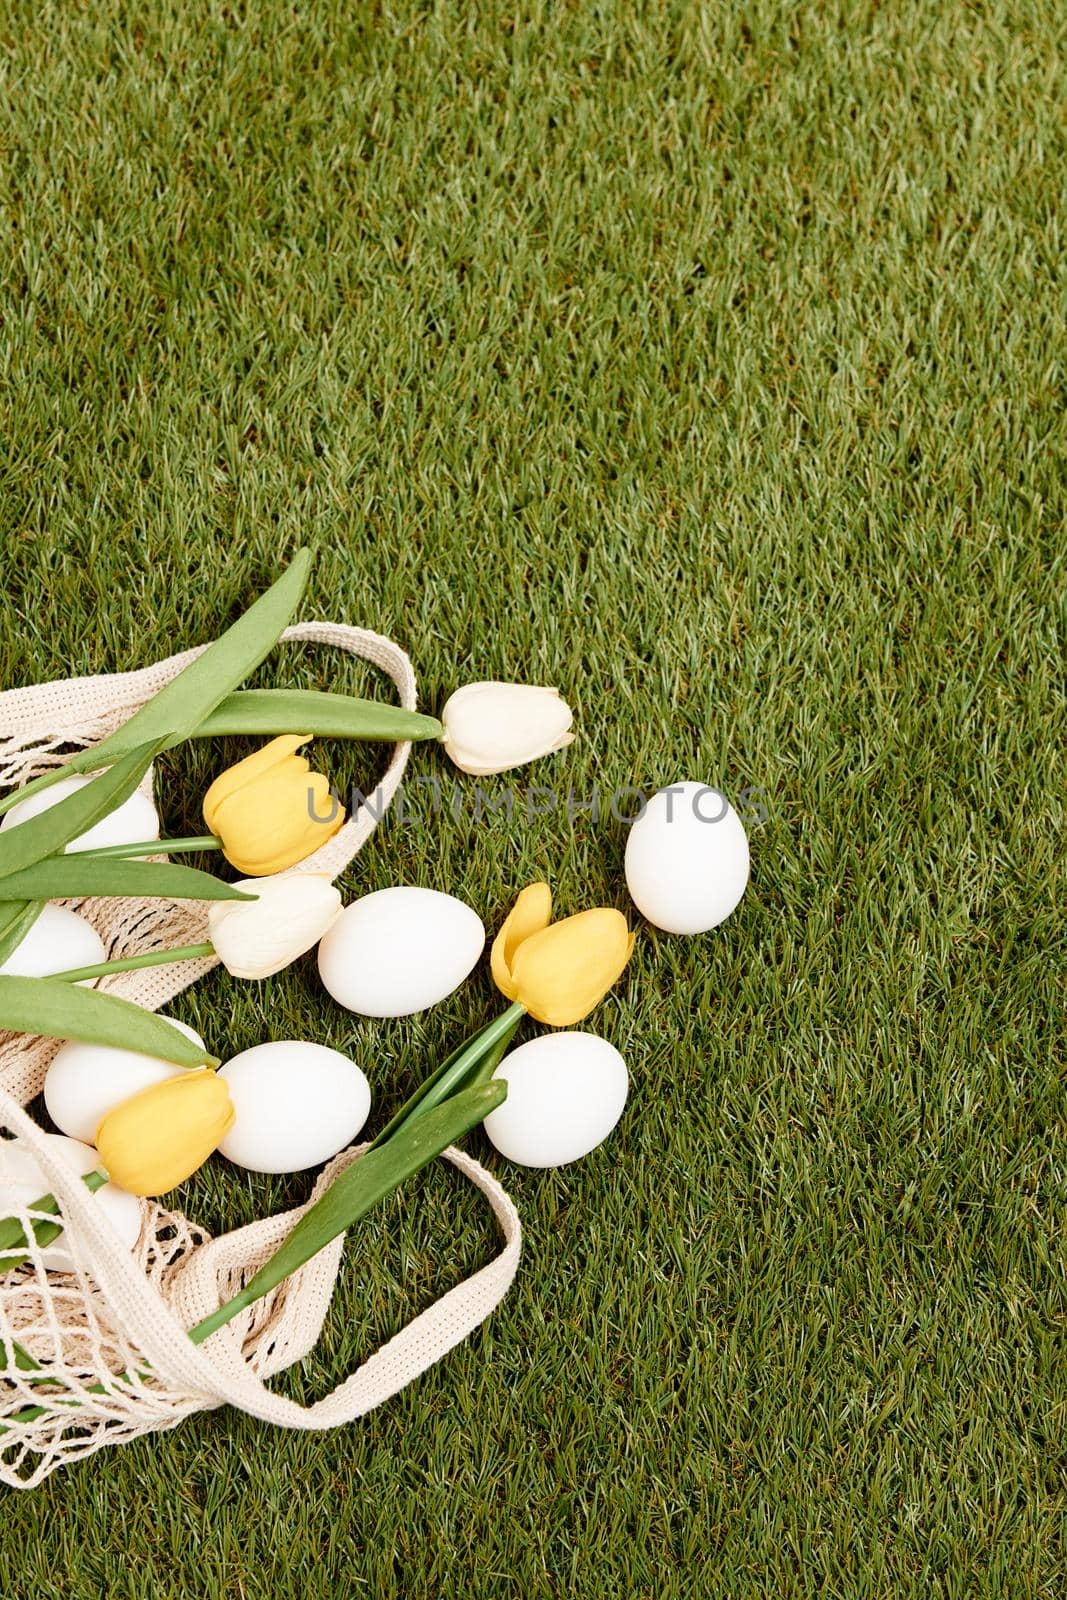 Easter eggs on the grass holiday spring christian day by SHOTPRIME